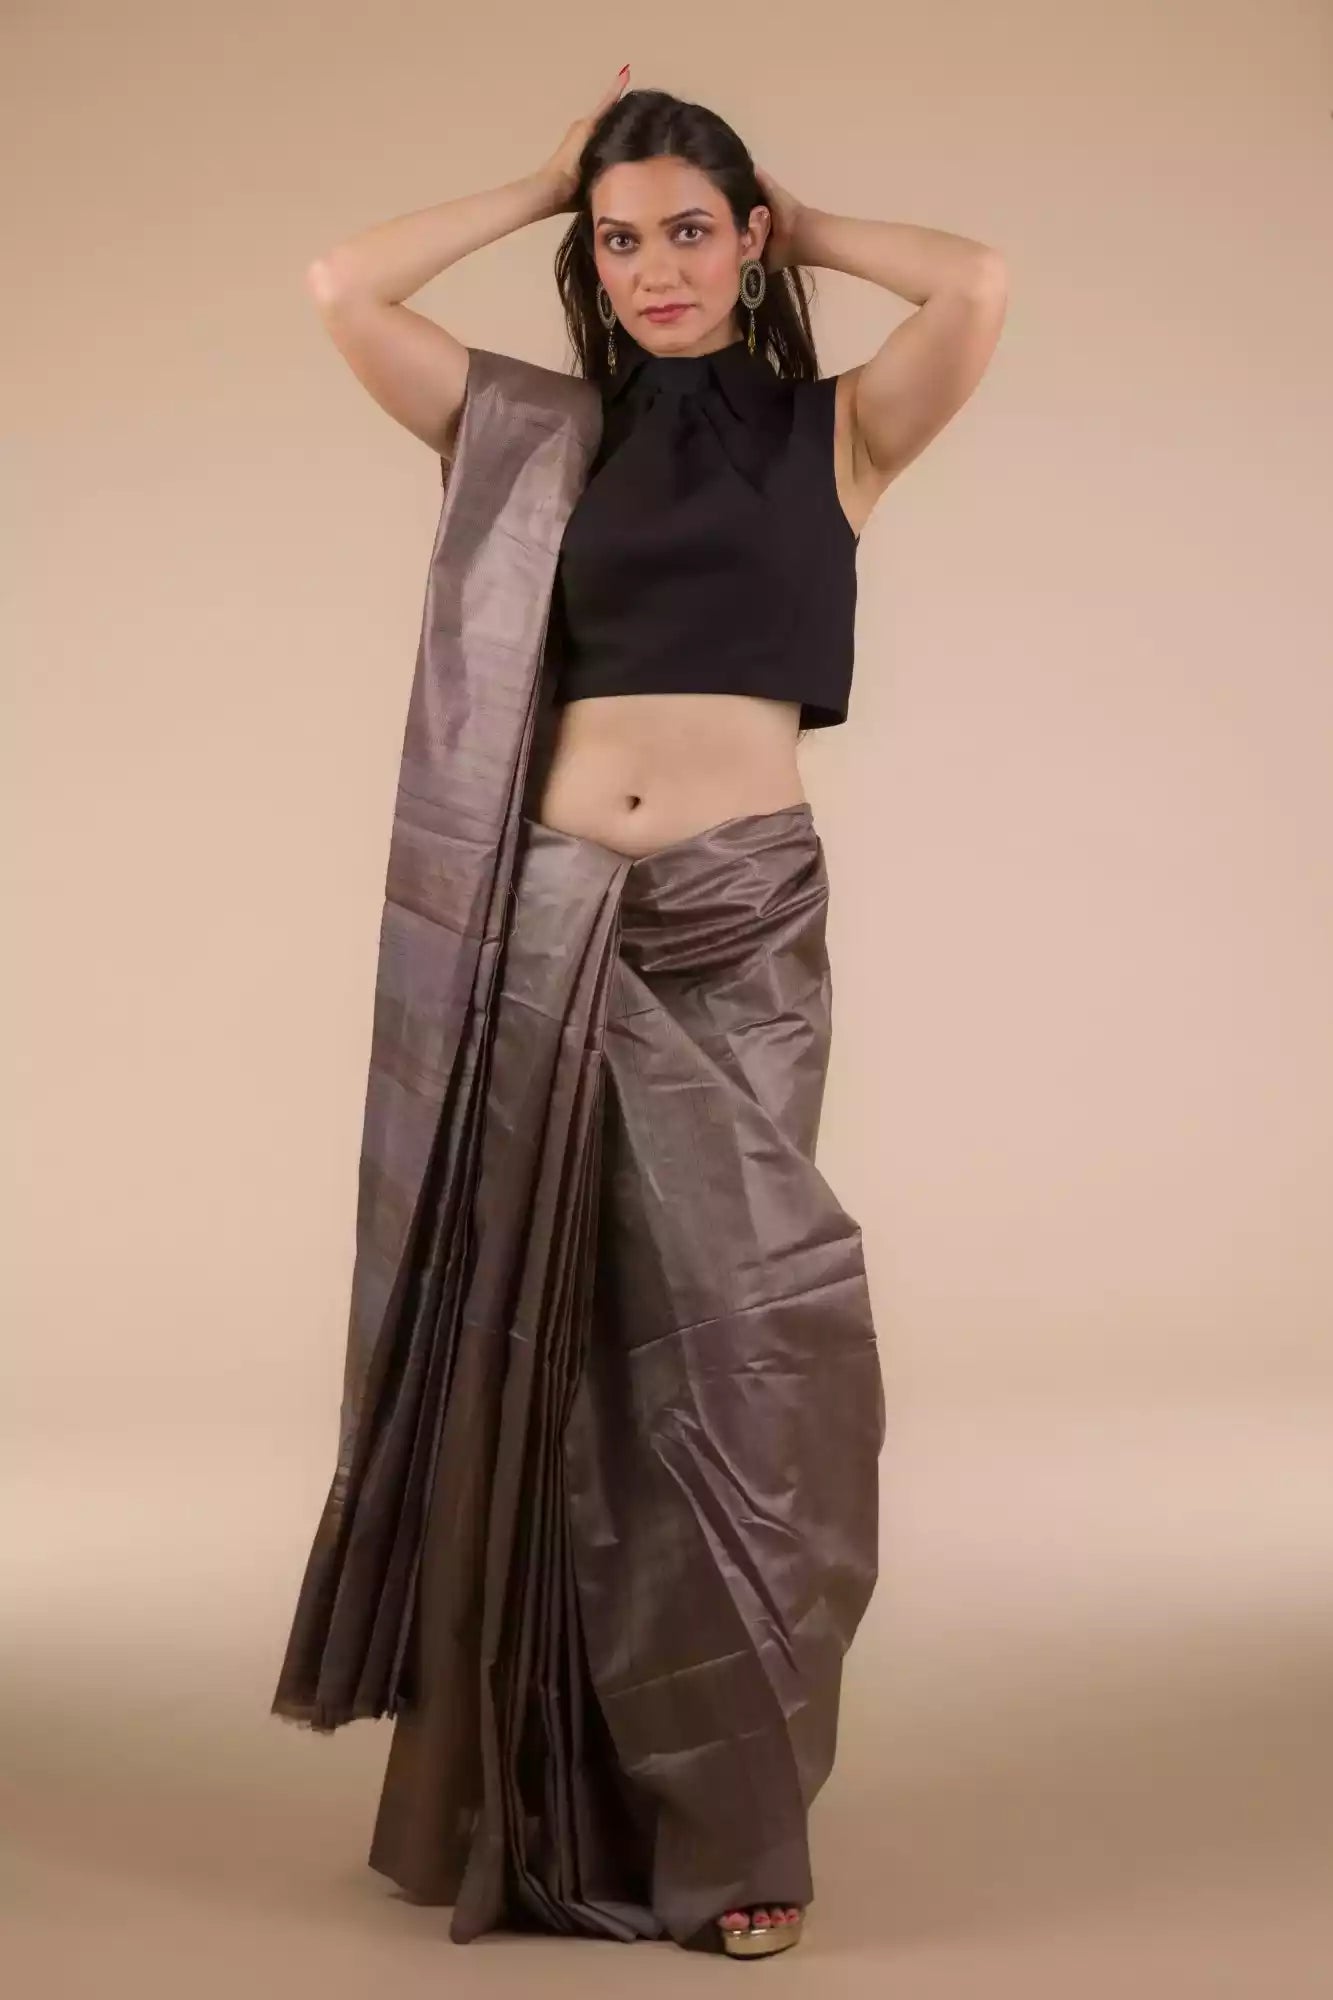 a woman with short hair is posing for the camera and she is wearing a purple saree and a black blouse